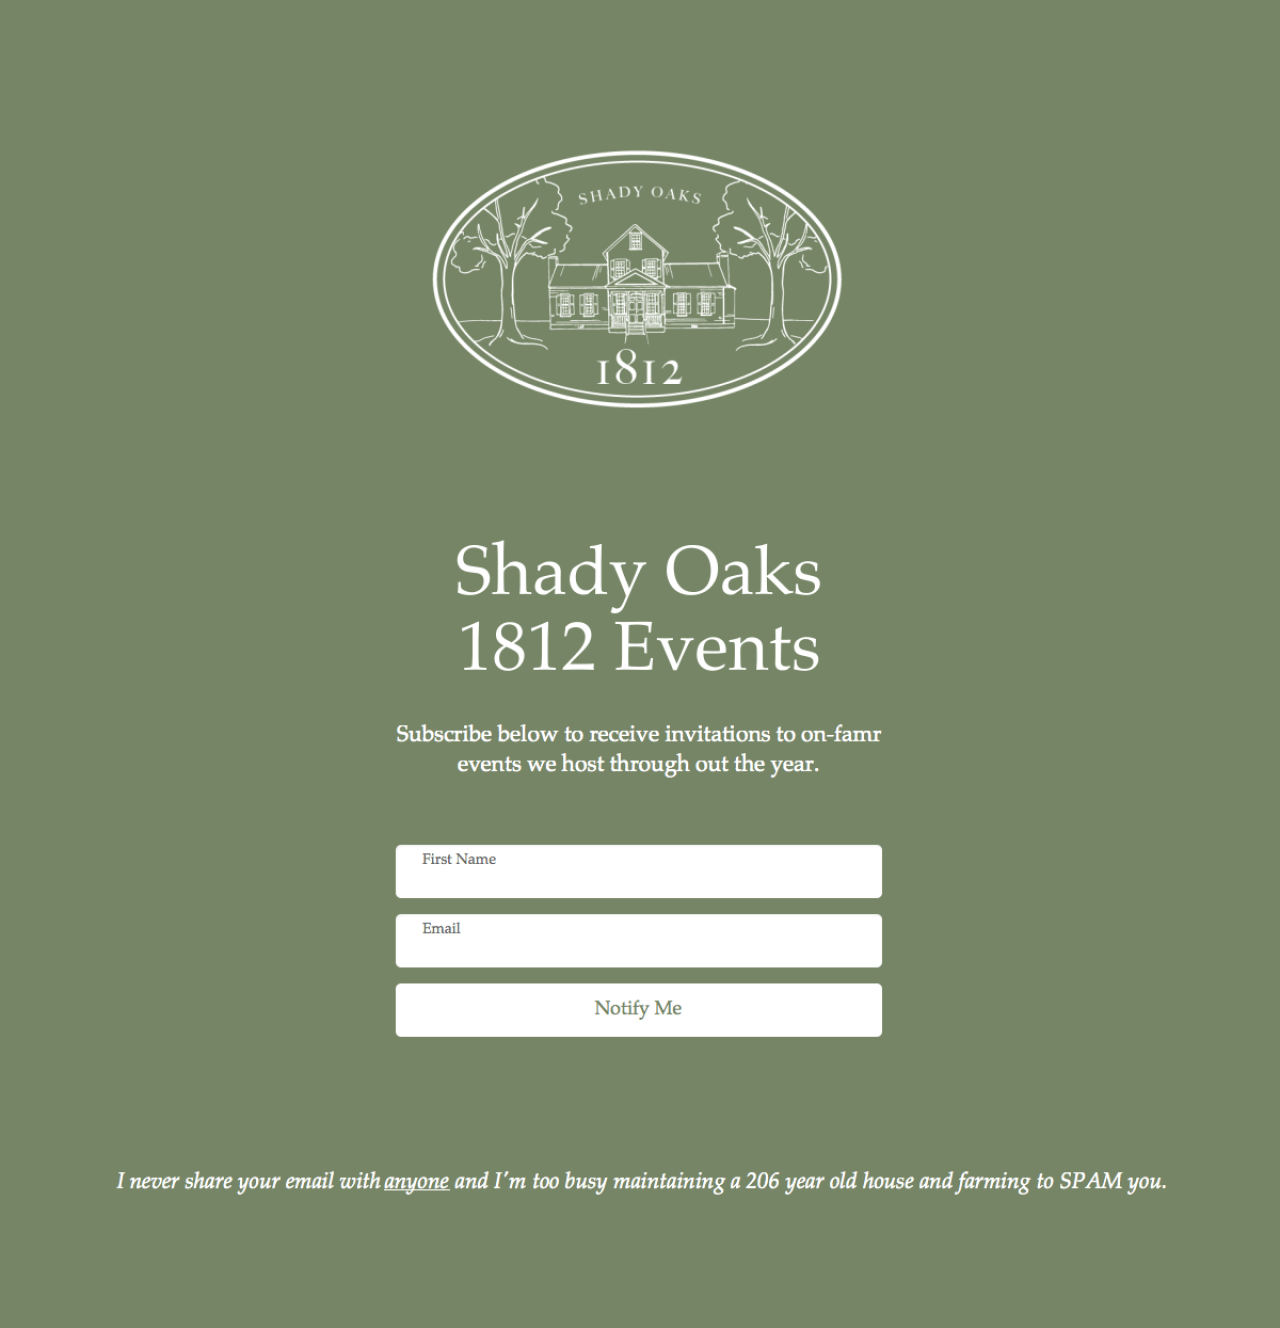 Shady Oaks 1812 example - Made with MailerLite